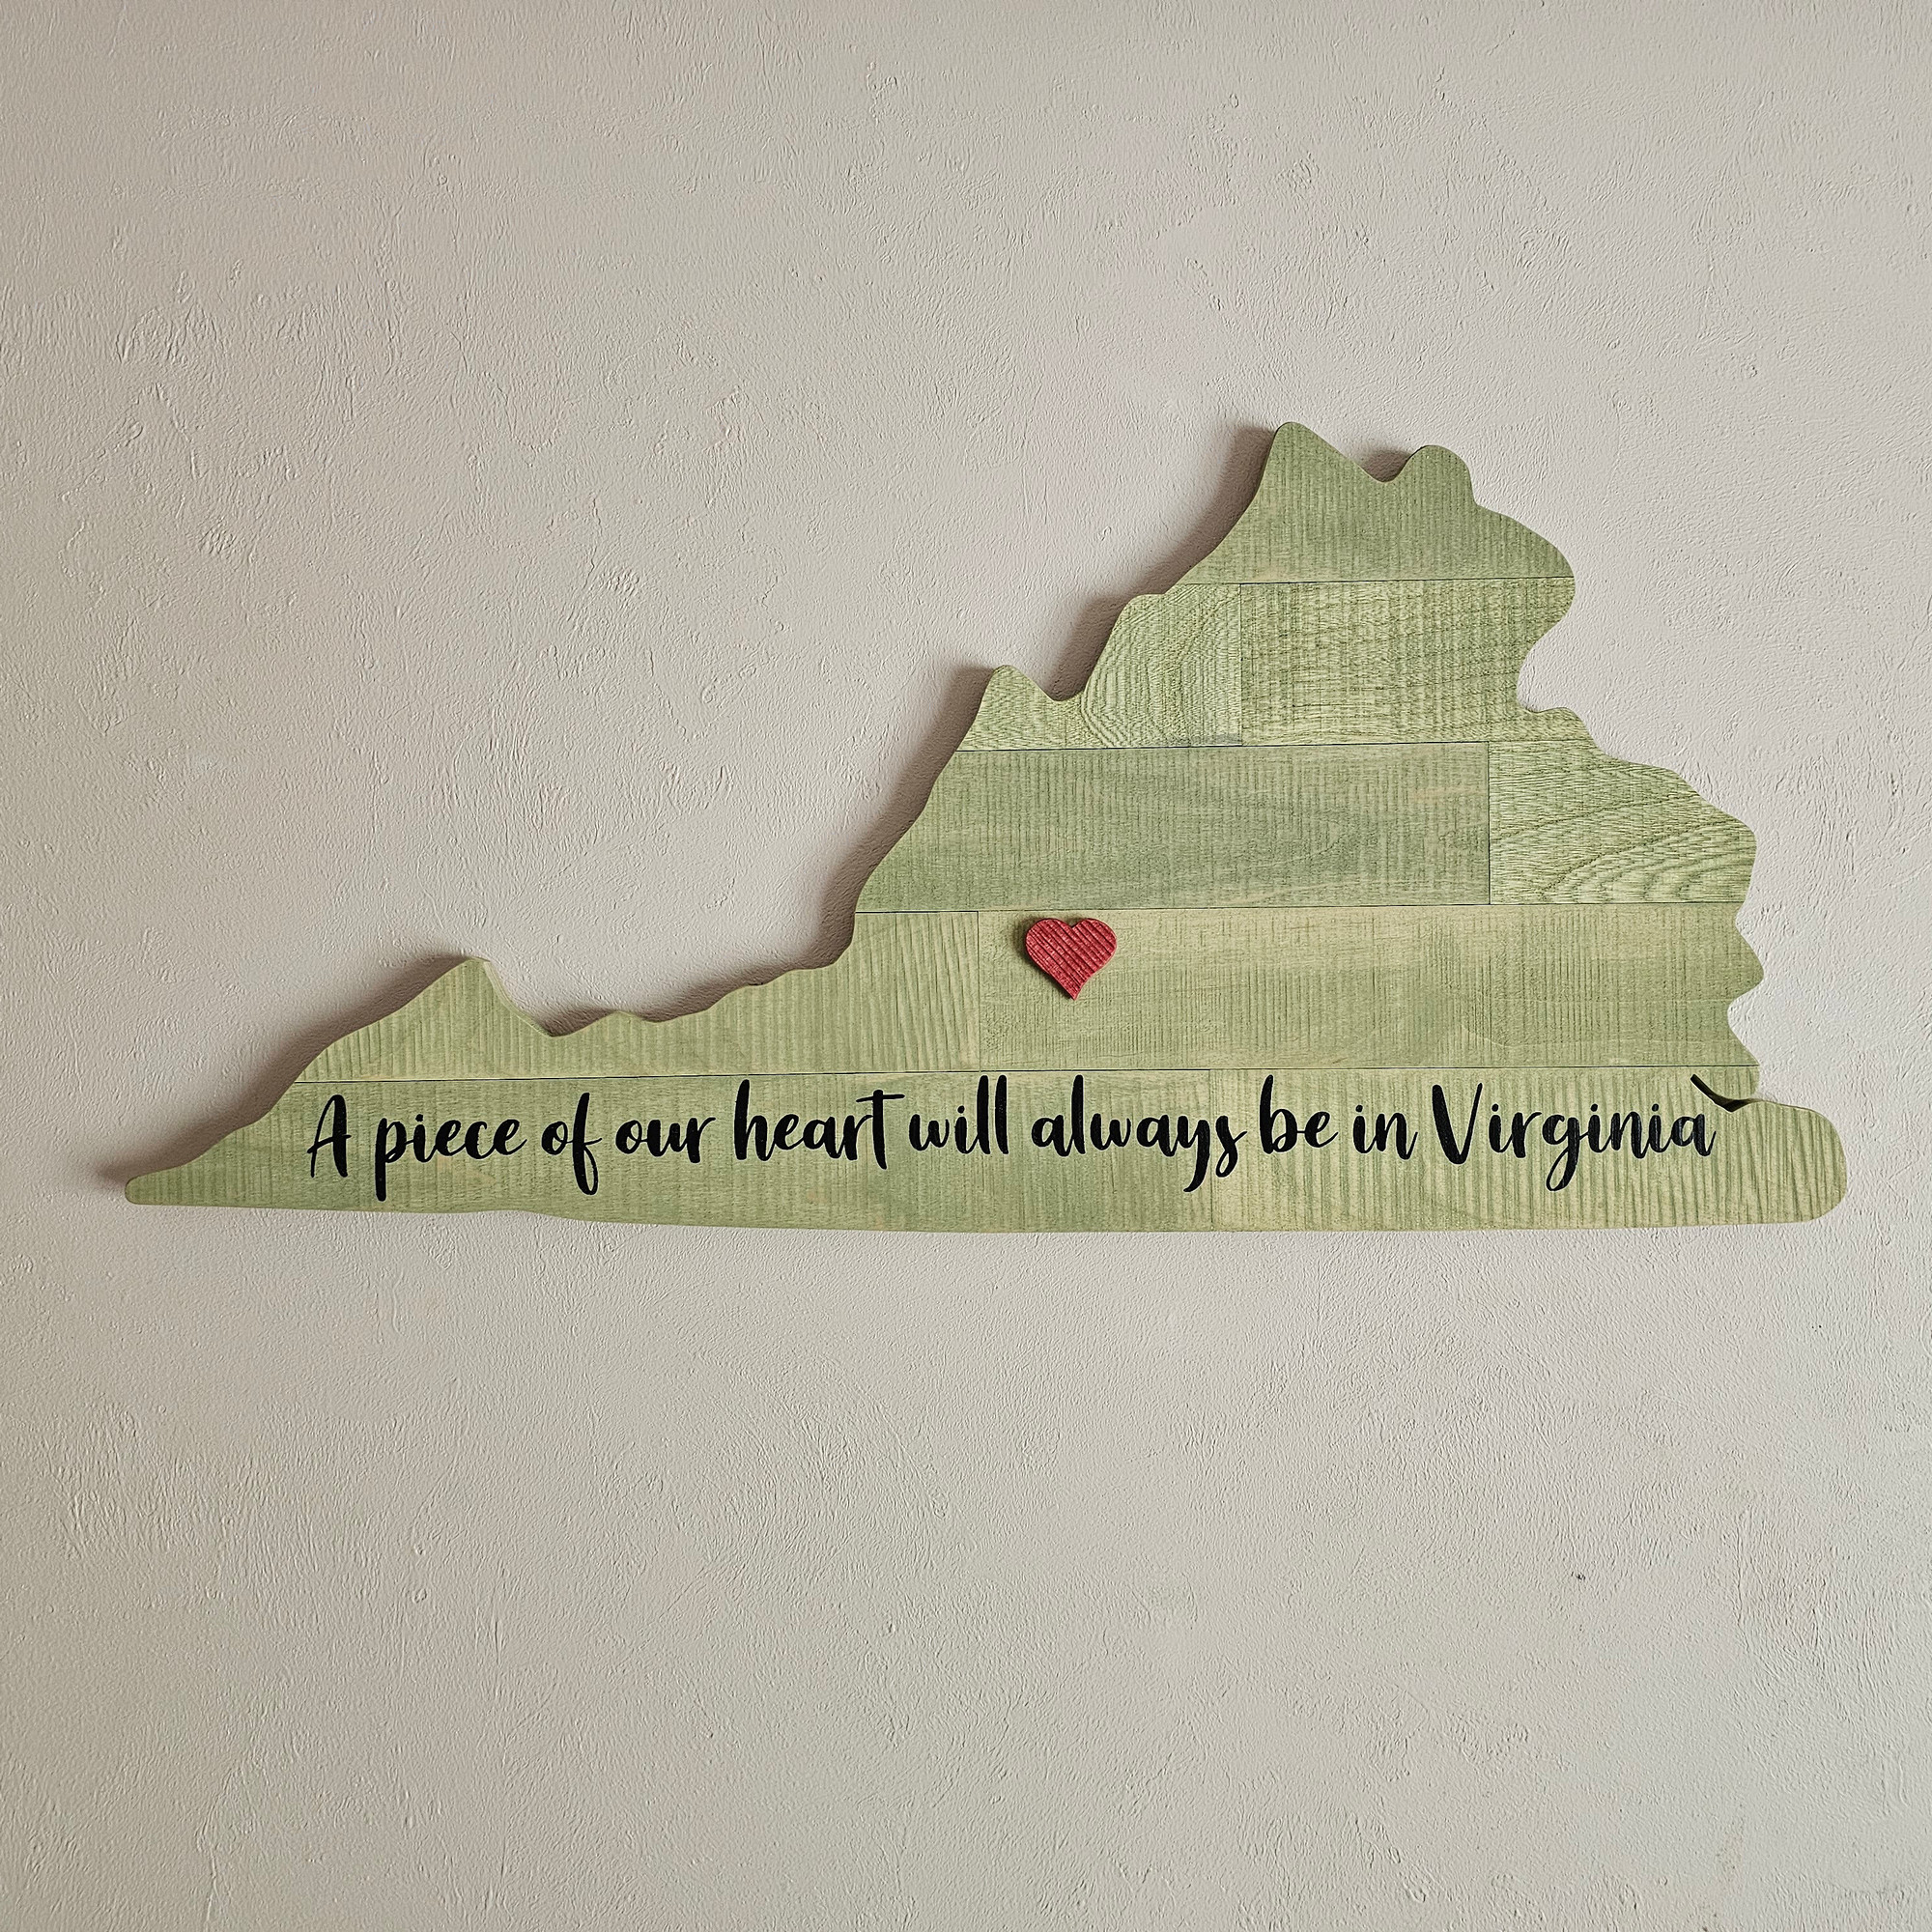 Streetwood Design Virginia State Wood Signs Cutout Wall Art Decor